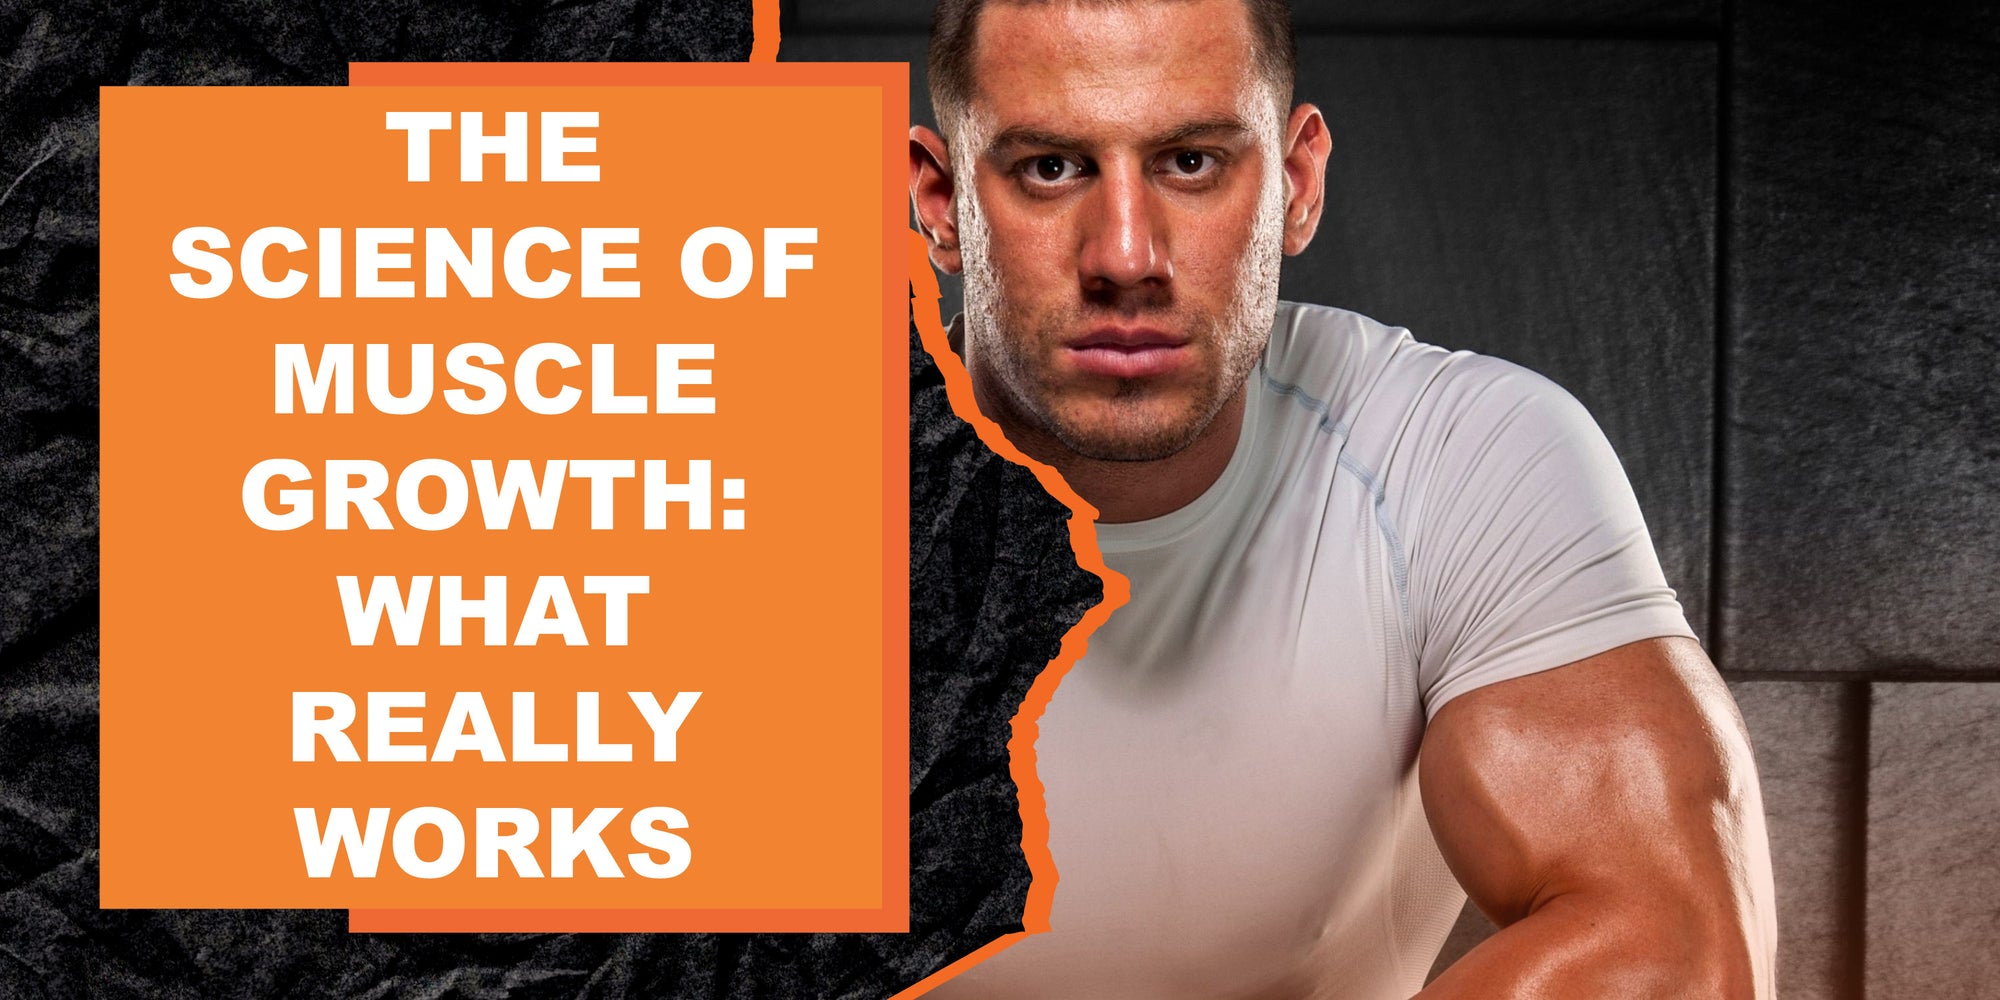 The Science of Muscle Growth: What Really Works